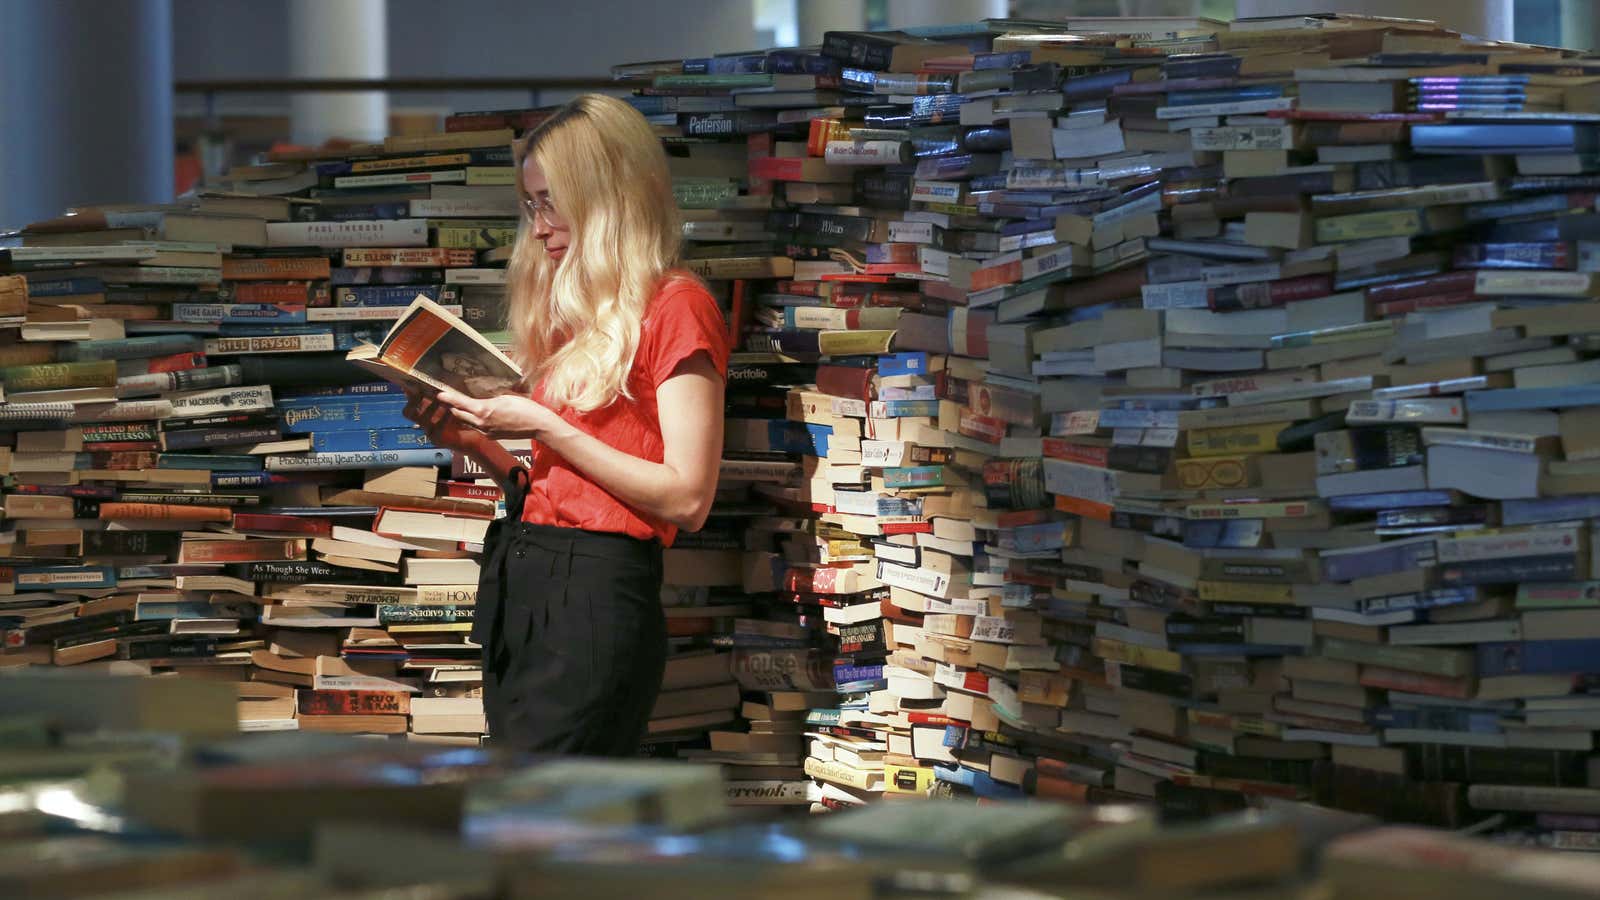 A gallery assistant poses with a book inside a labyrinth installation made up of 250,000 books titled “aMAZEme” by Marcos Saboya and Gualter Pupo at…